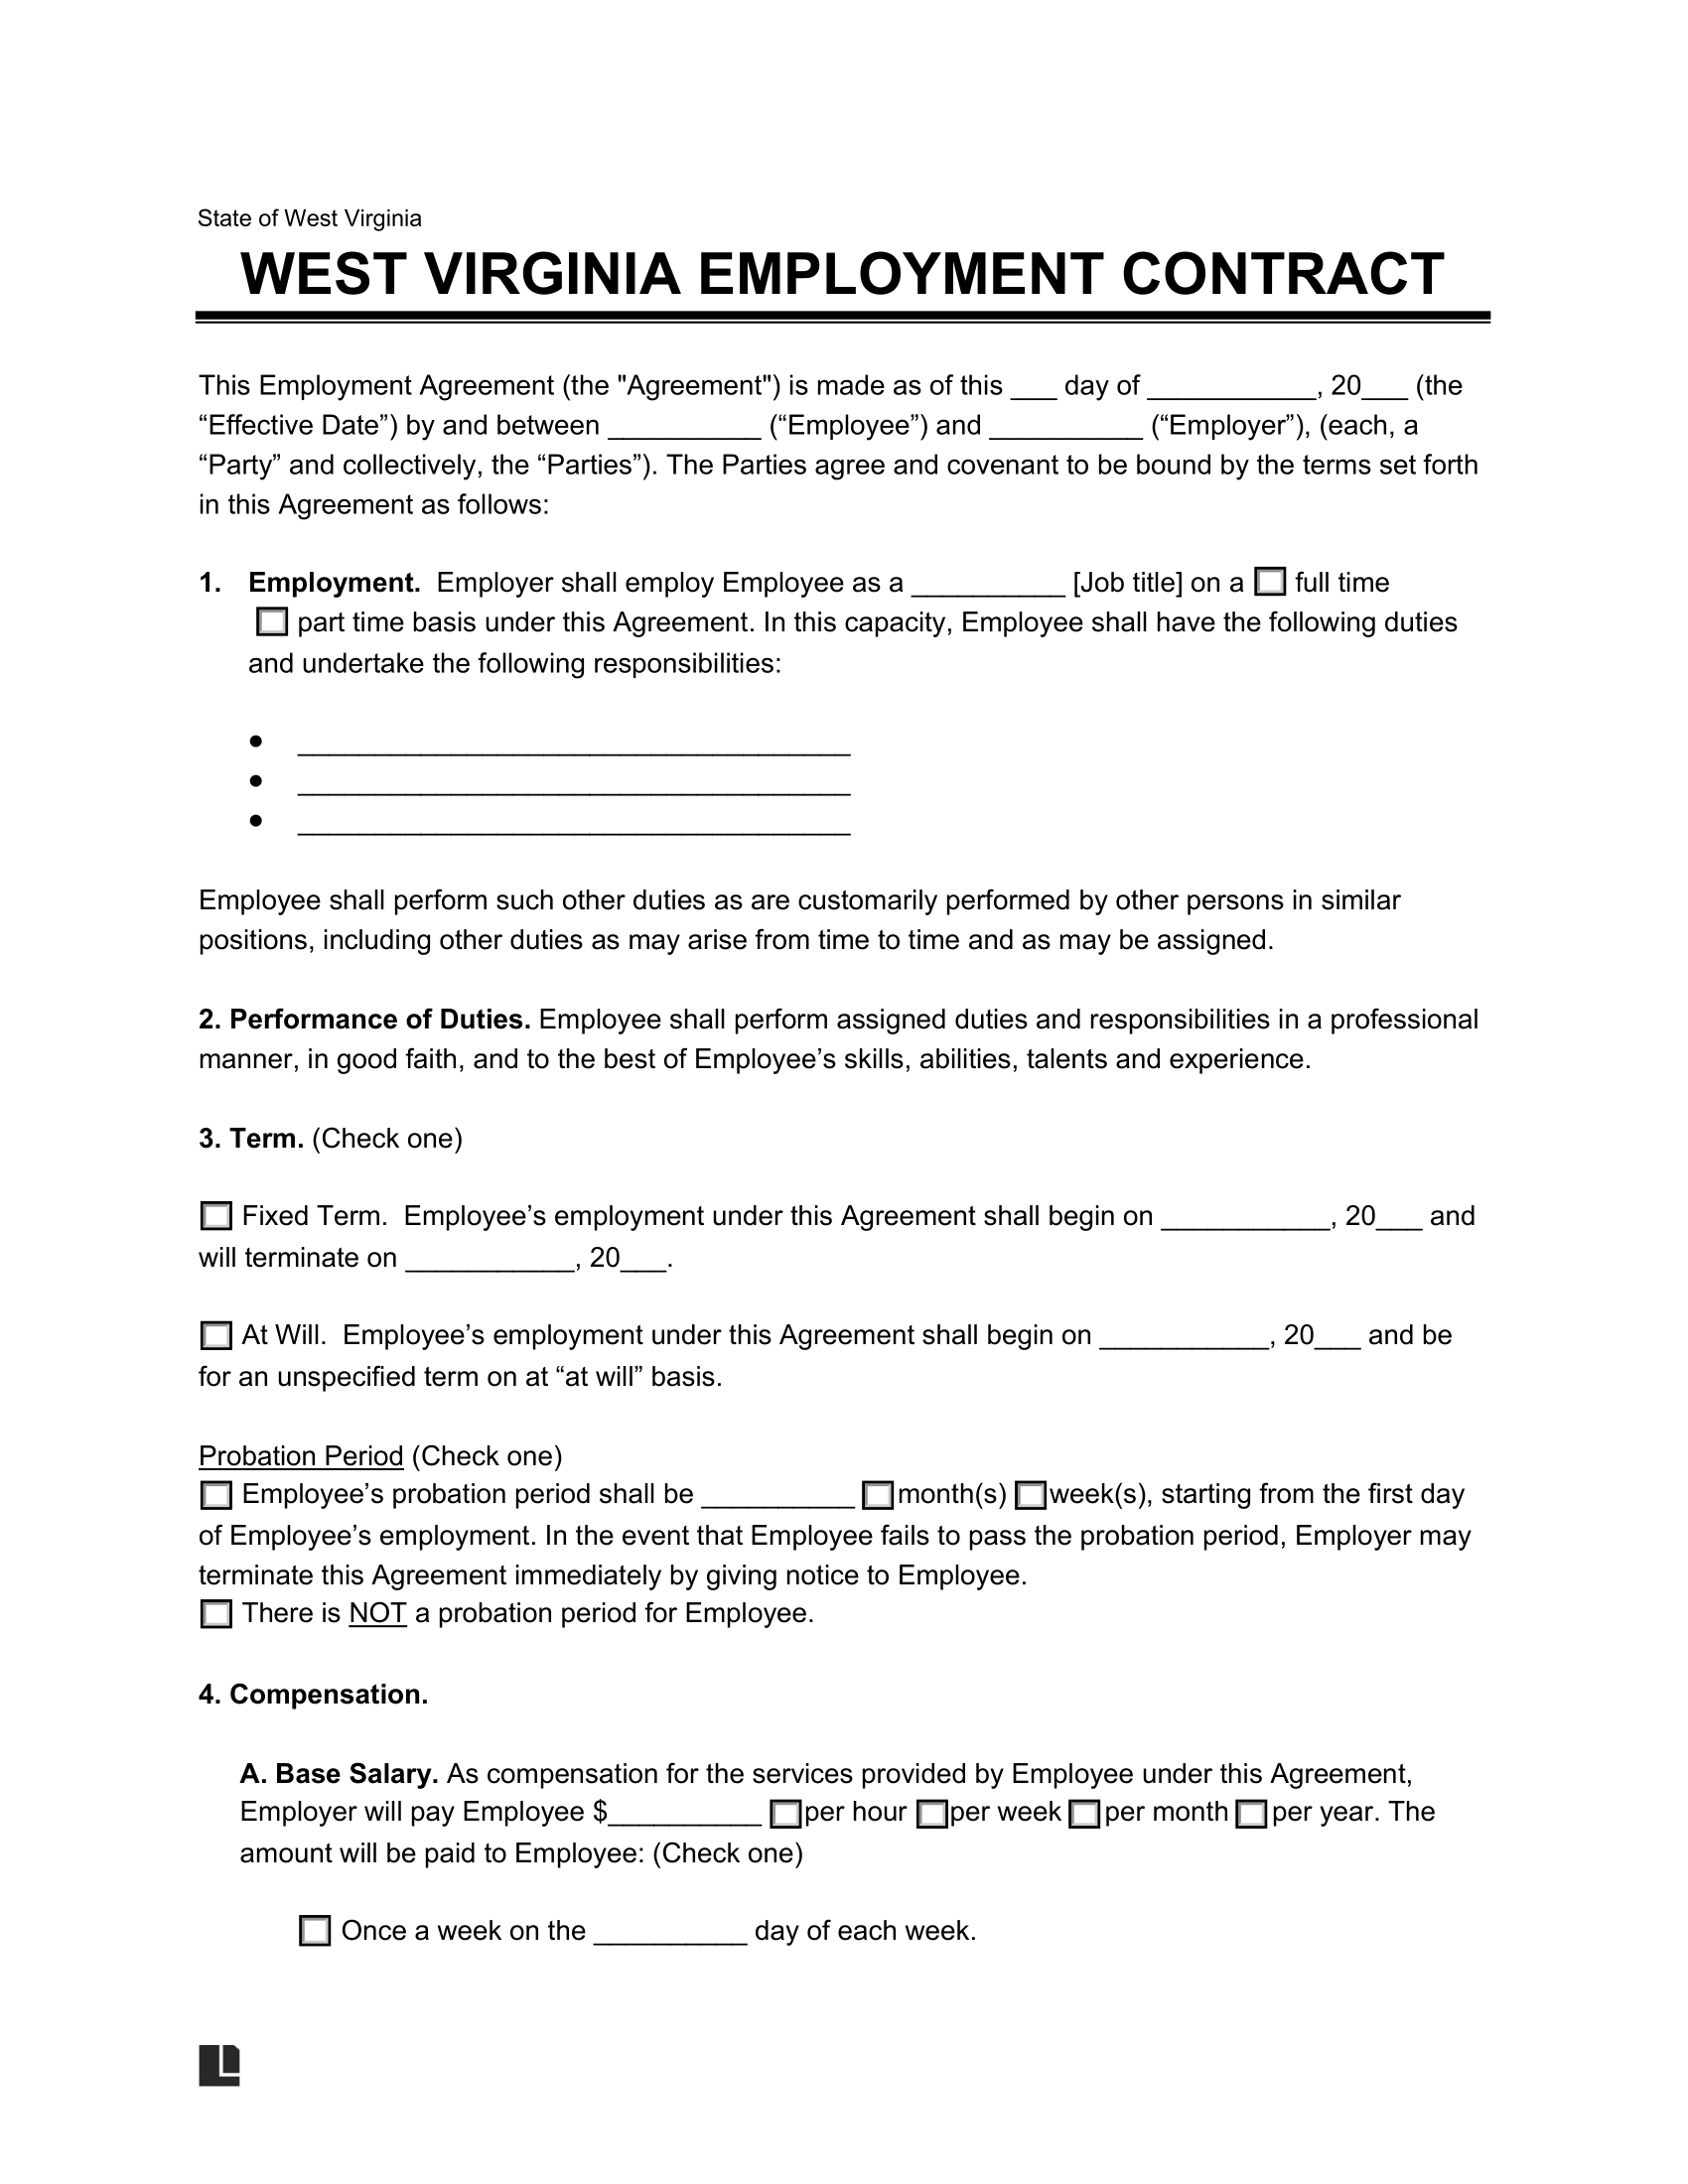 West Virginia Employment Contract Template